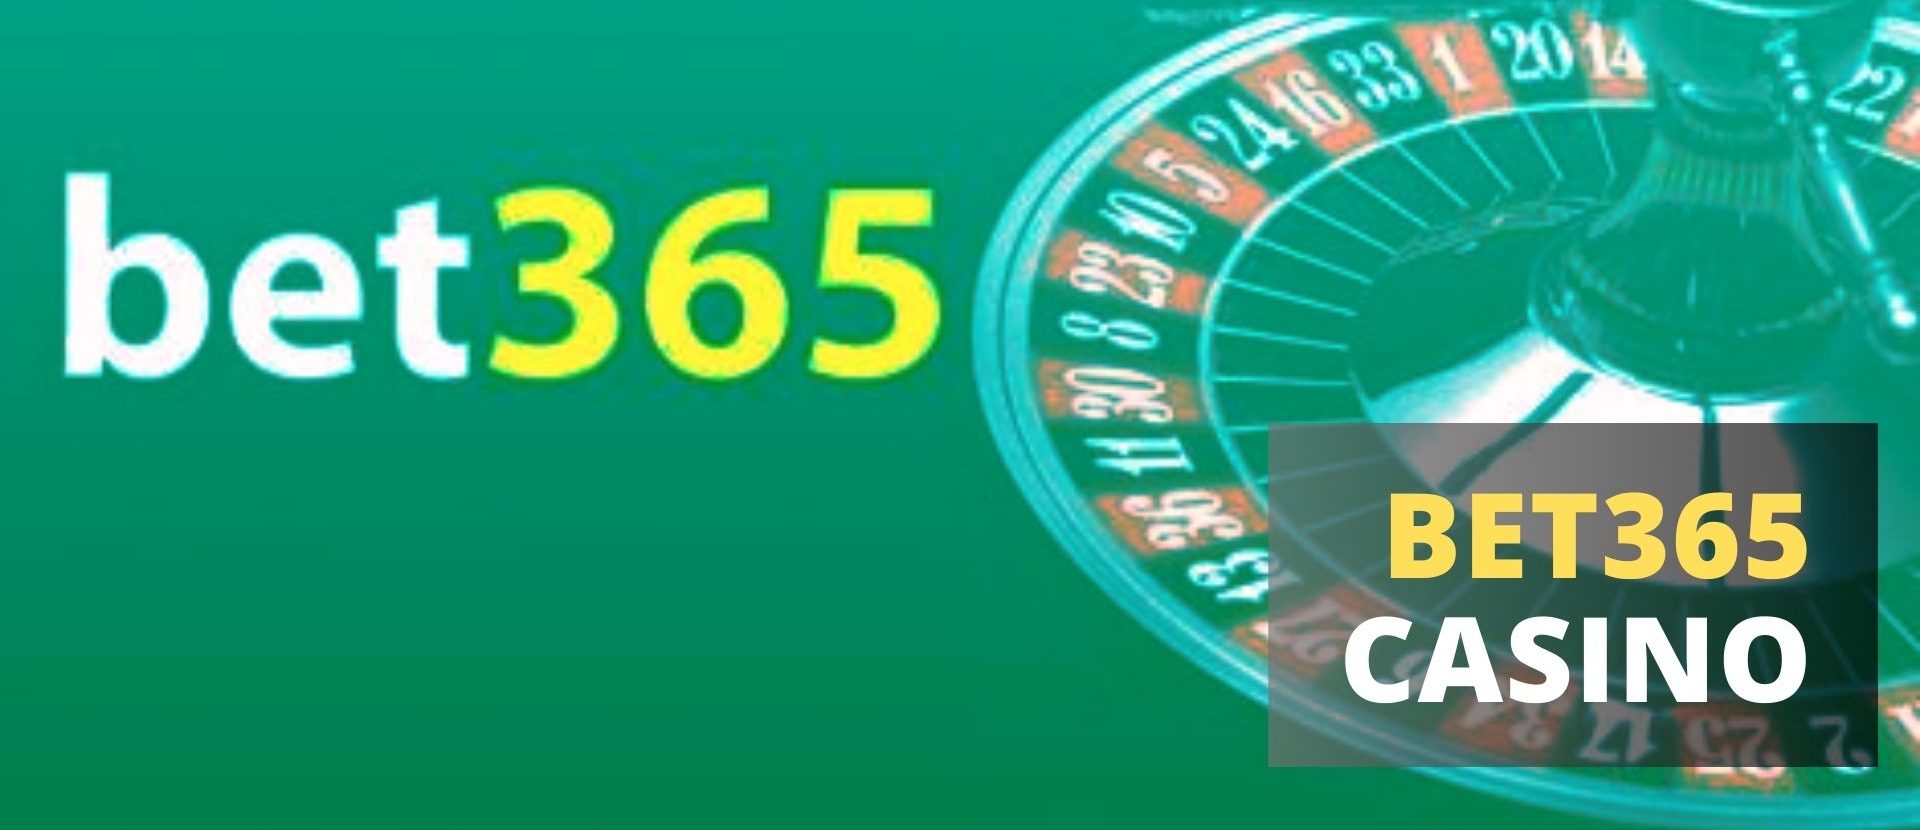 Bet365: The Ultimate Gaming Destination for Casino Games and Sports Betting Fans in the USA